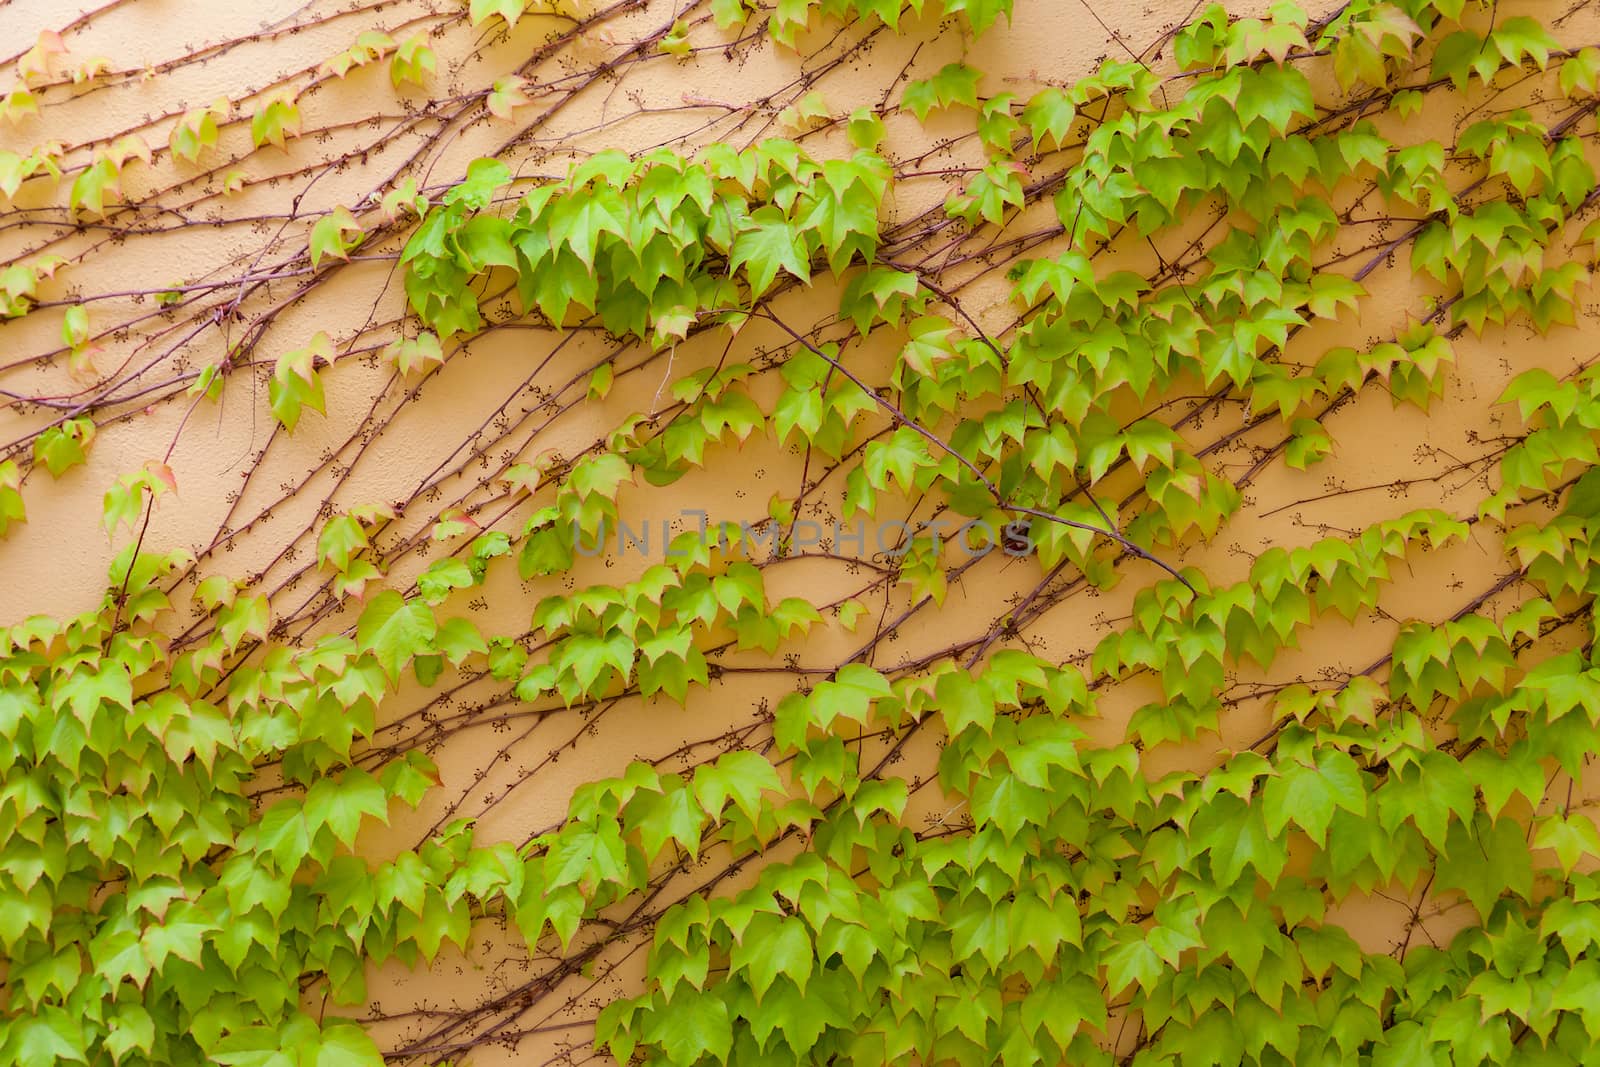 Some ivy on a beige wall